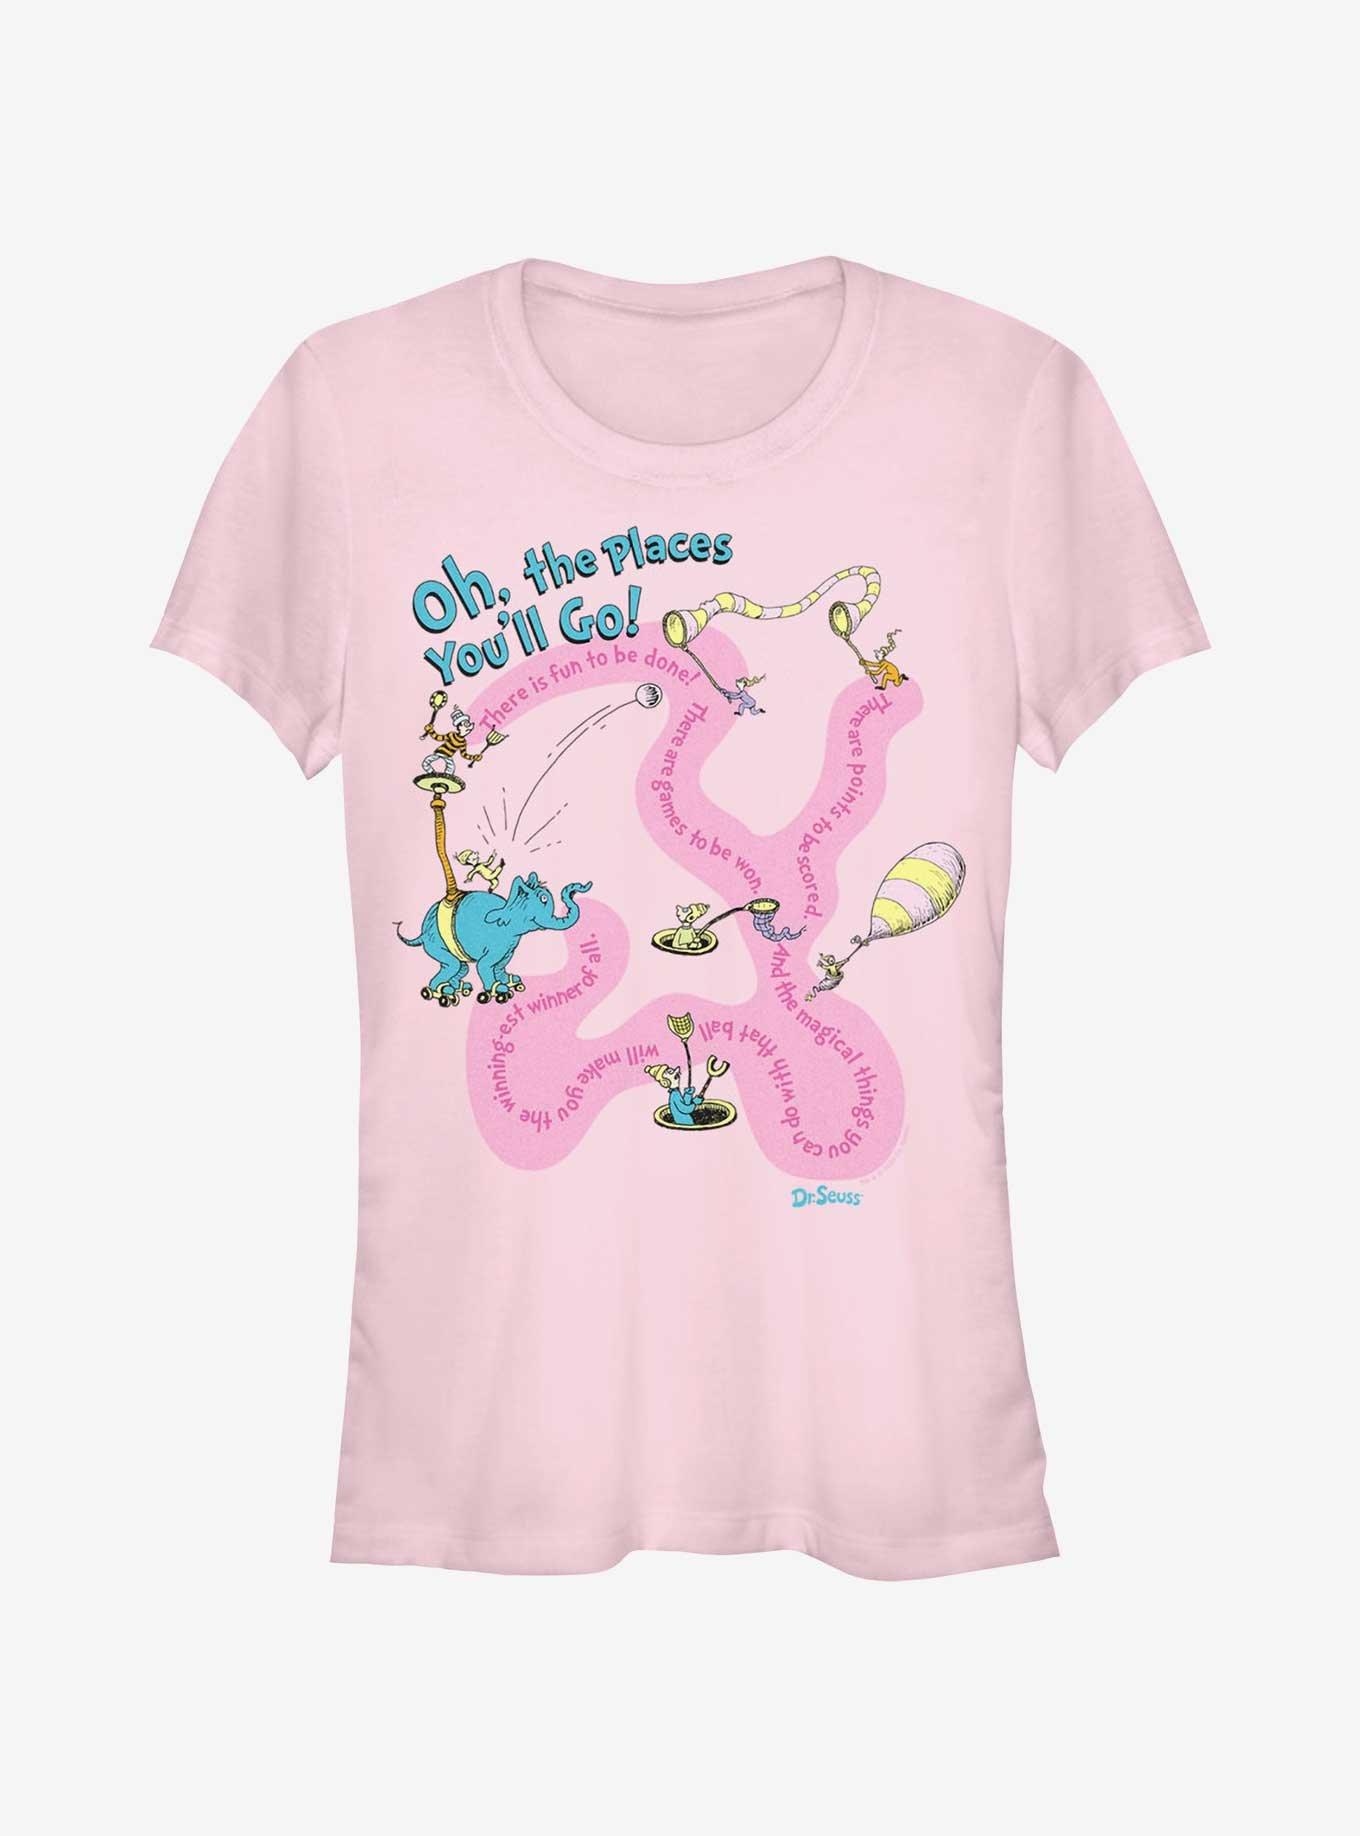 Dr. Seuss Journeying The Places You'll Go Girls T-Shirt, LIGHT PINK, hi-res